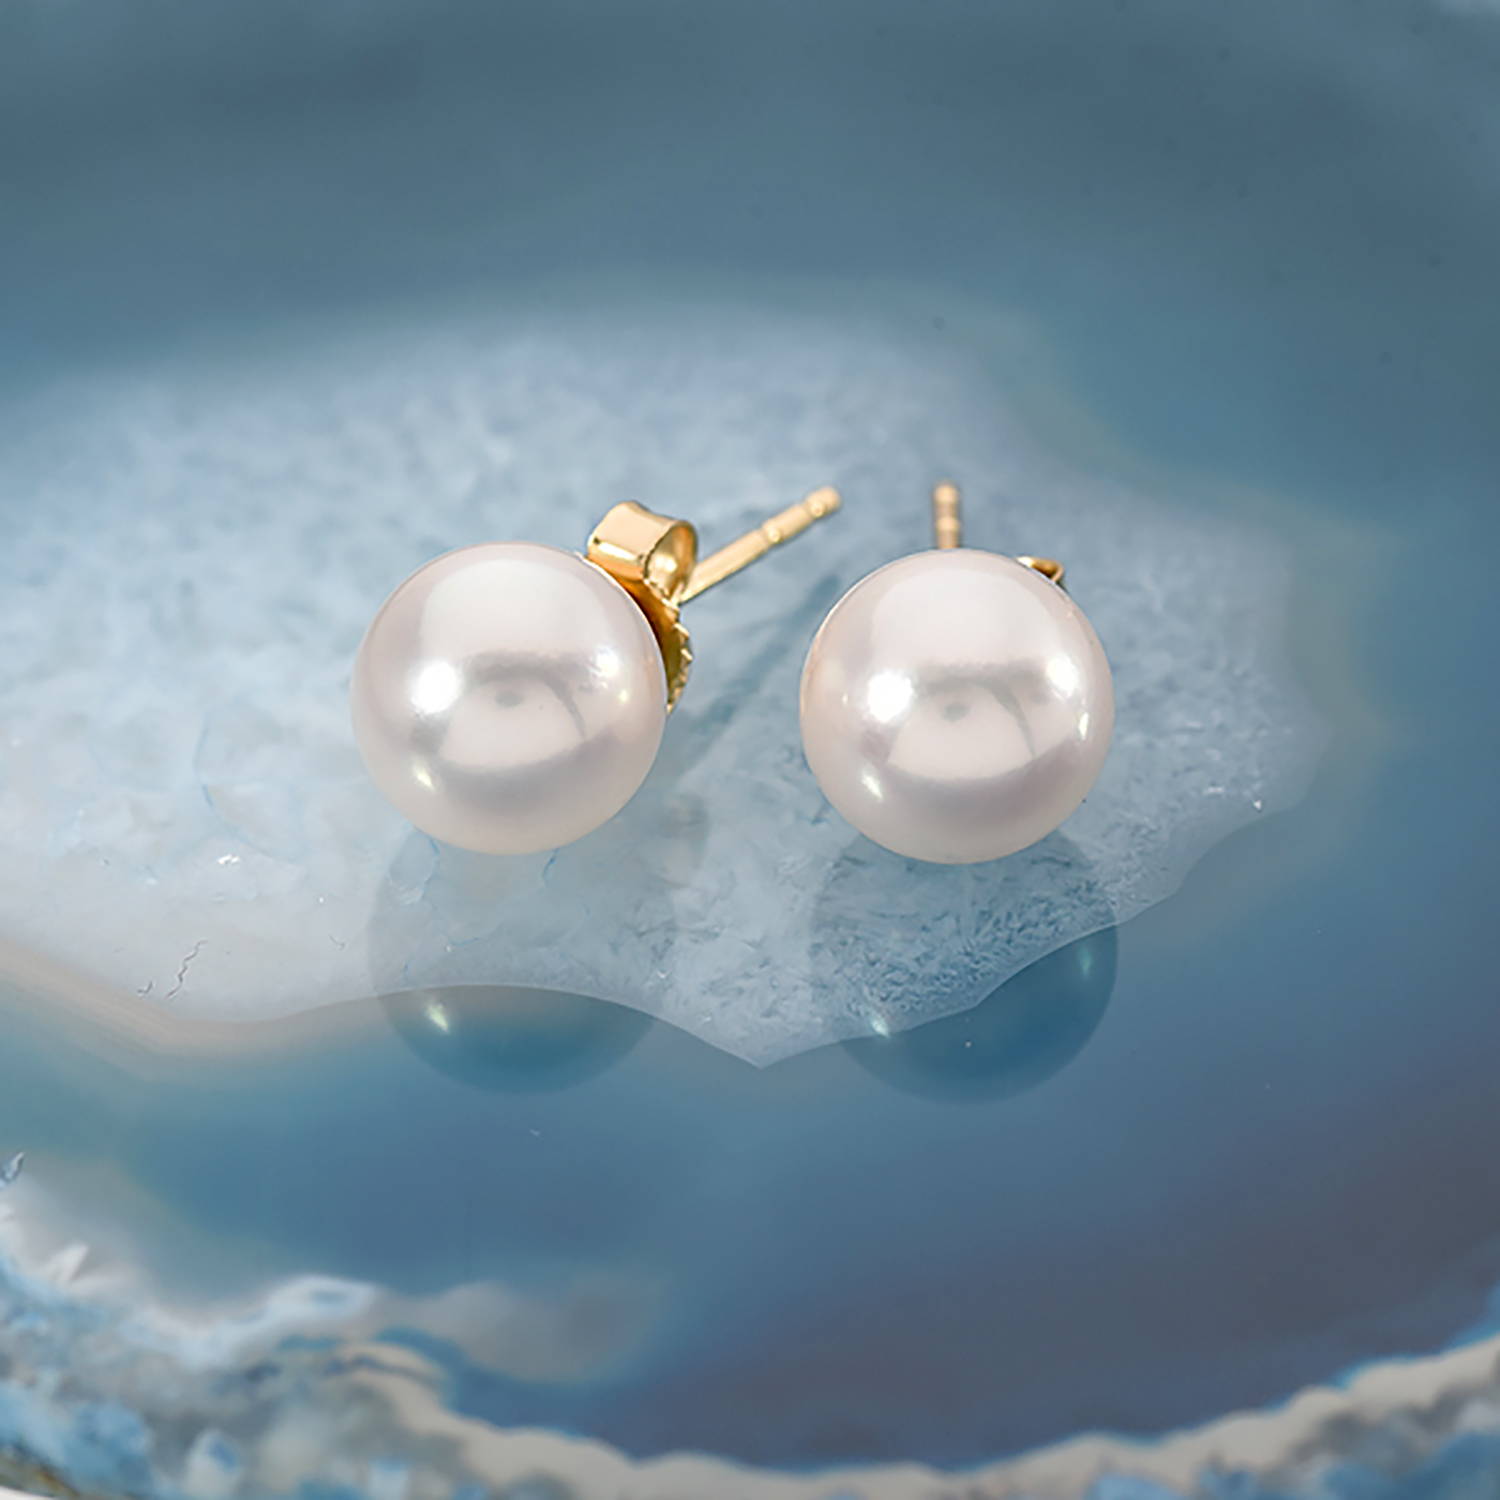 A pair of white Akoya pearl earrings on a blue geode slice